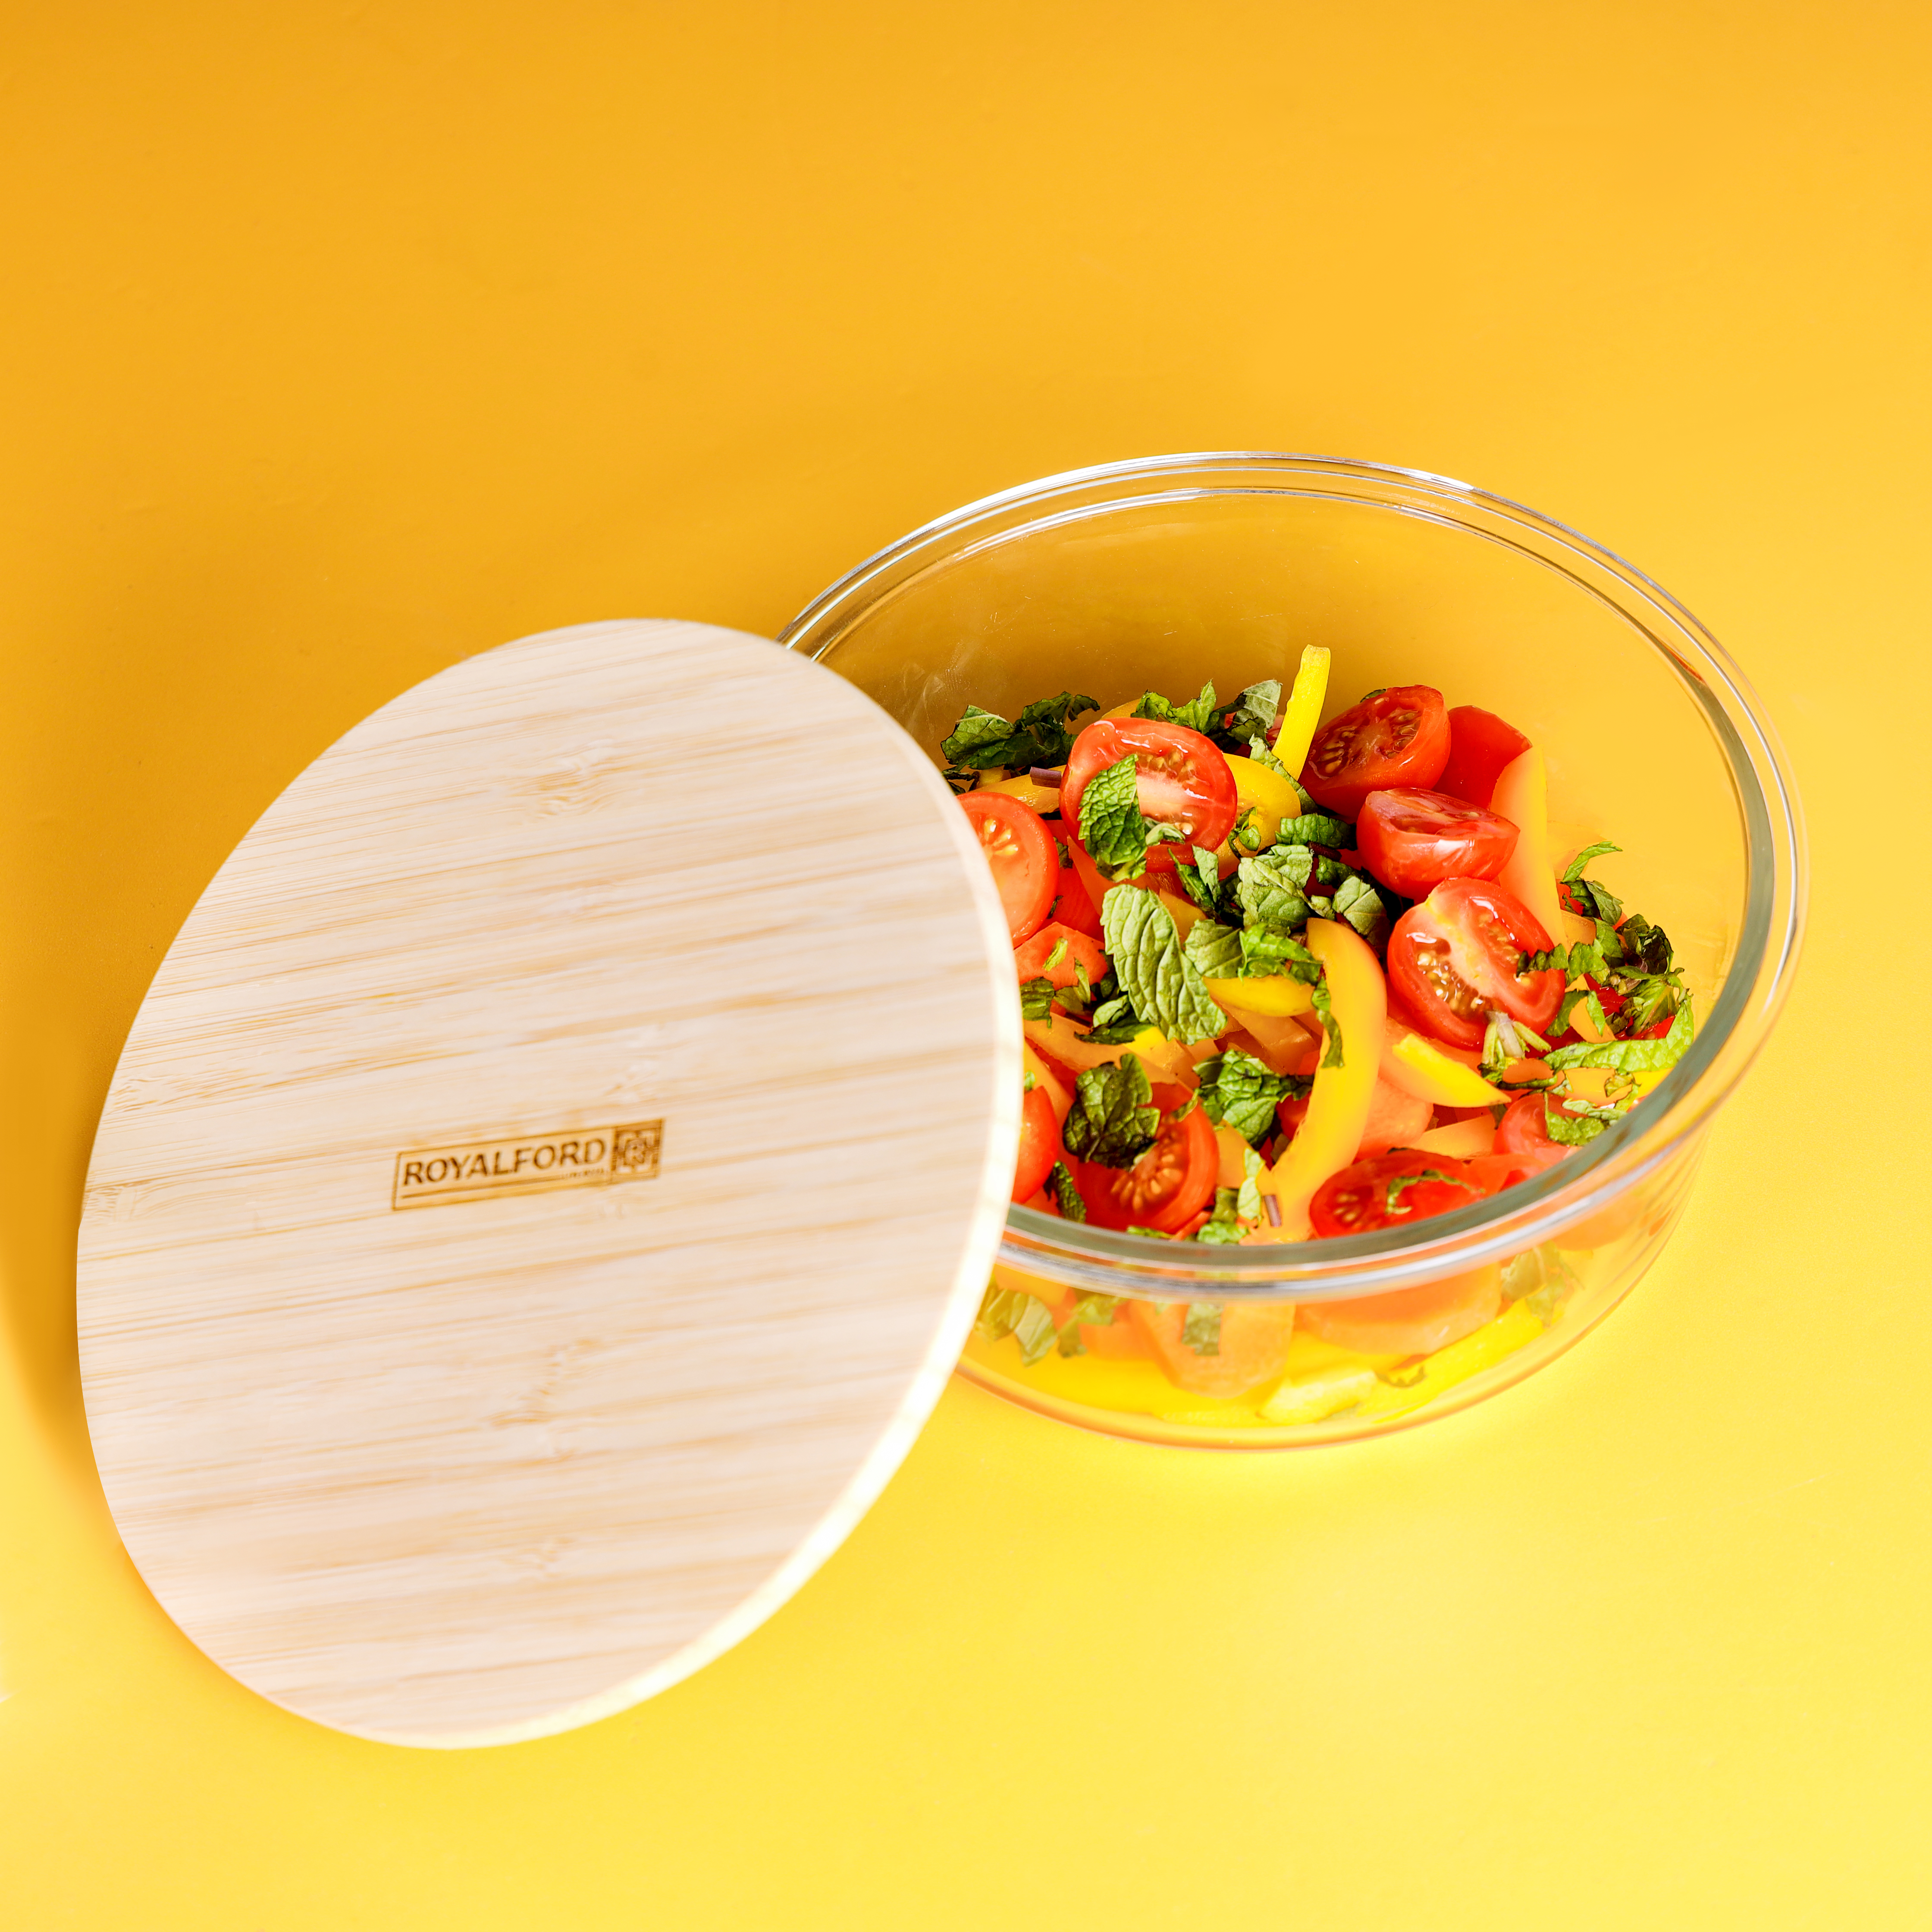 Borosilicate Glass Container with Bamboo Lid - 650ML